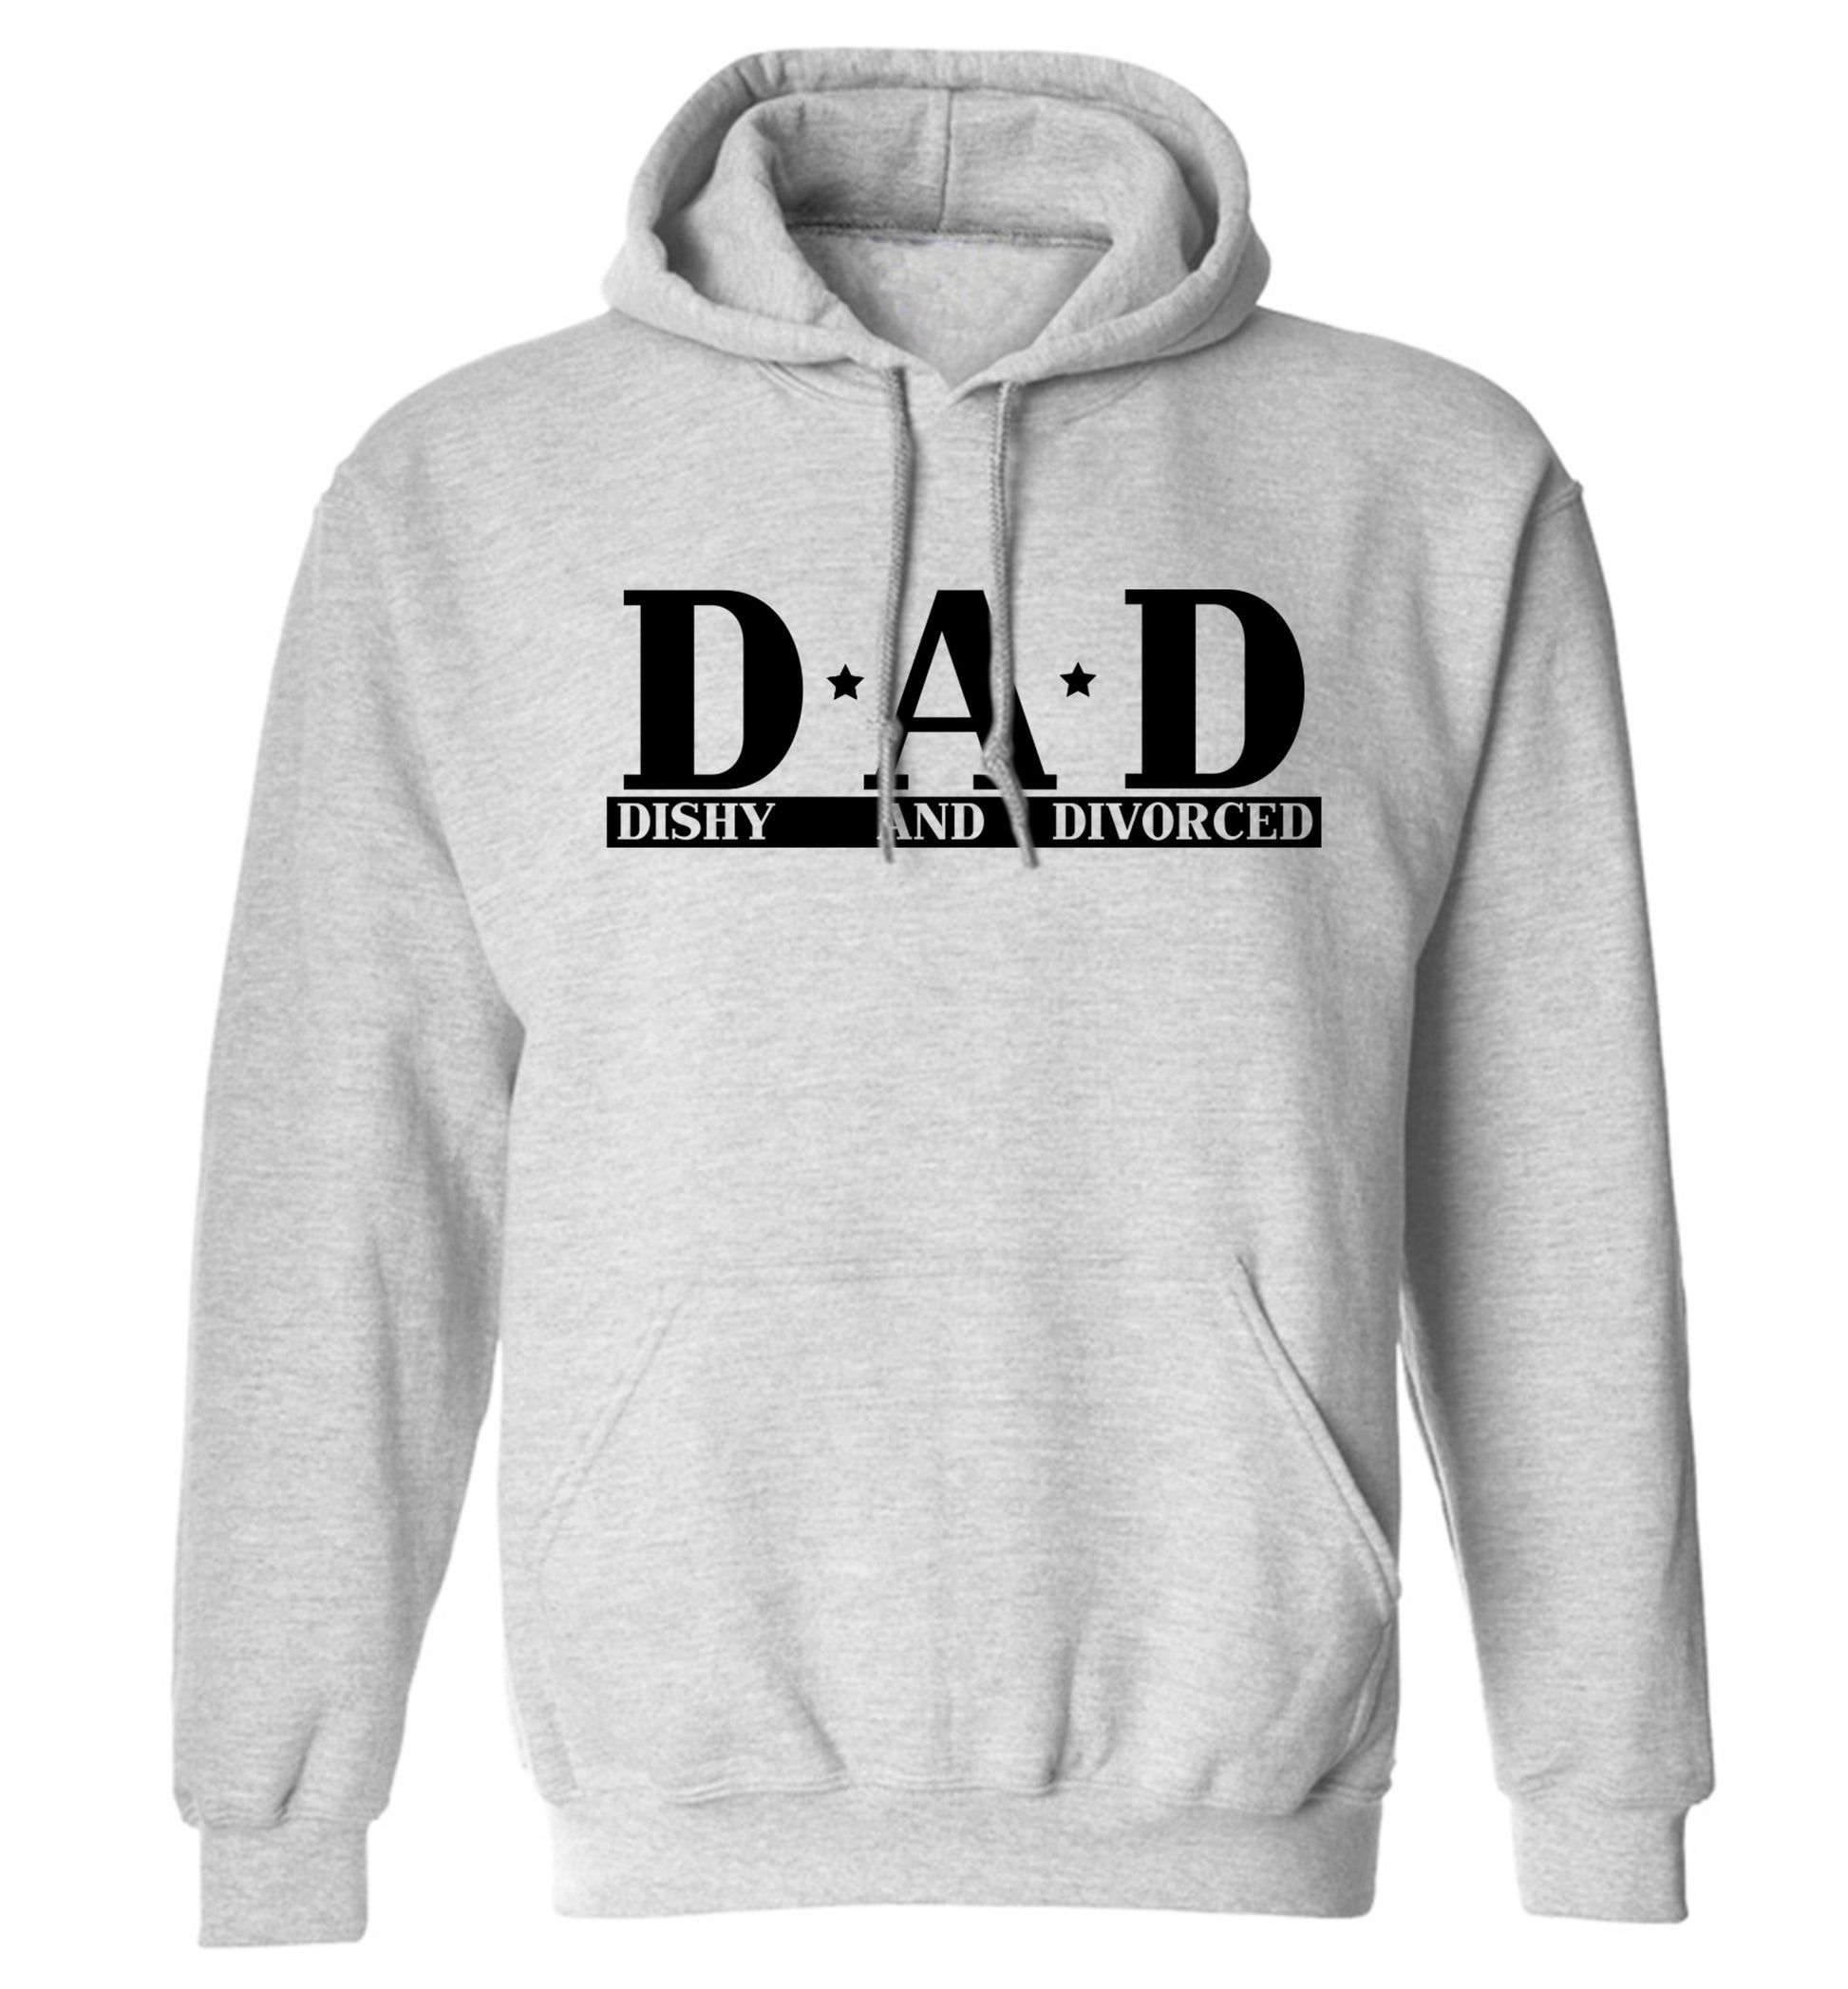 D.A.D meaning Dishy and Divorced adults unisex grey hoodie 2XL